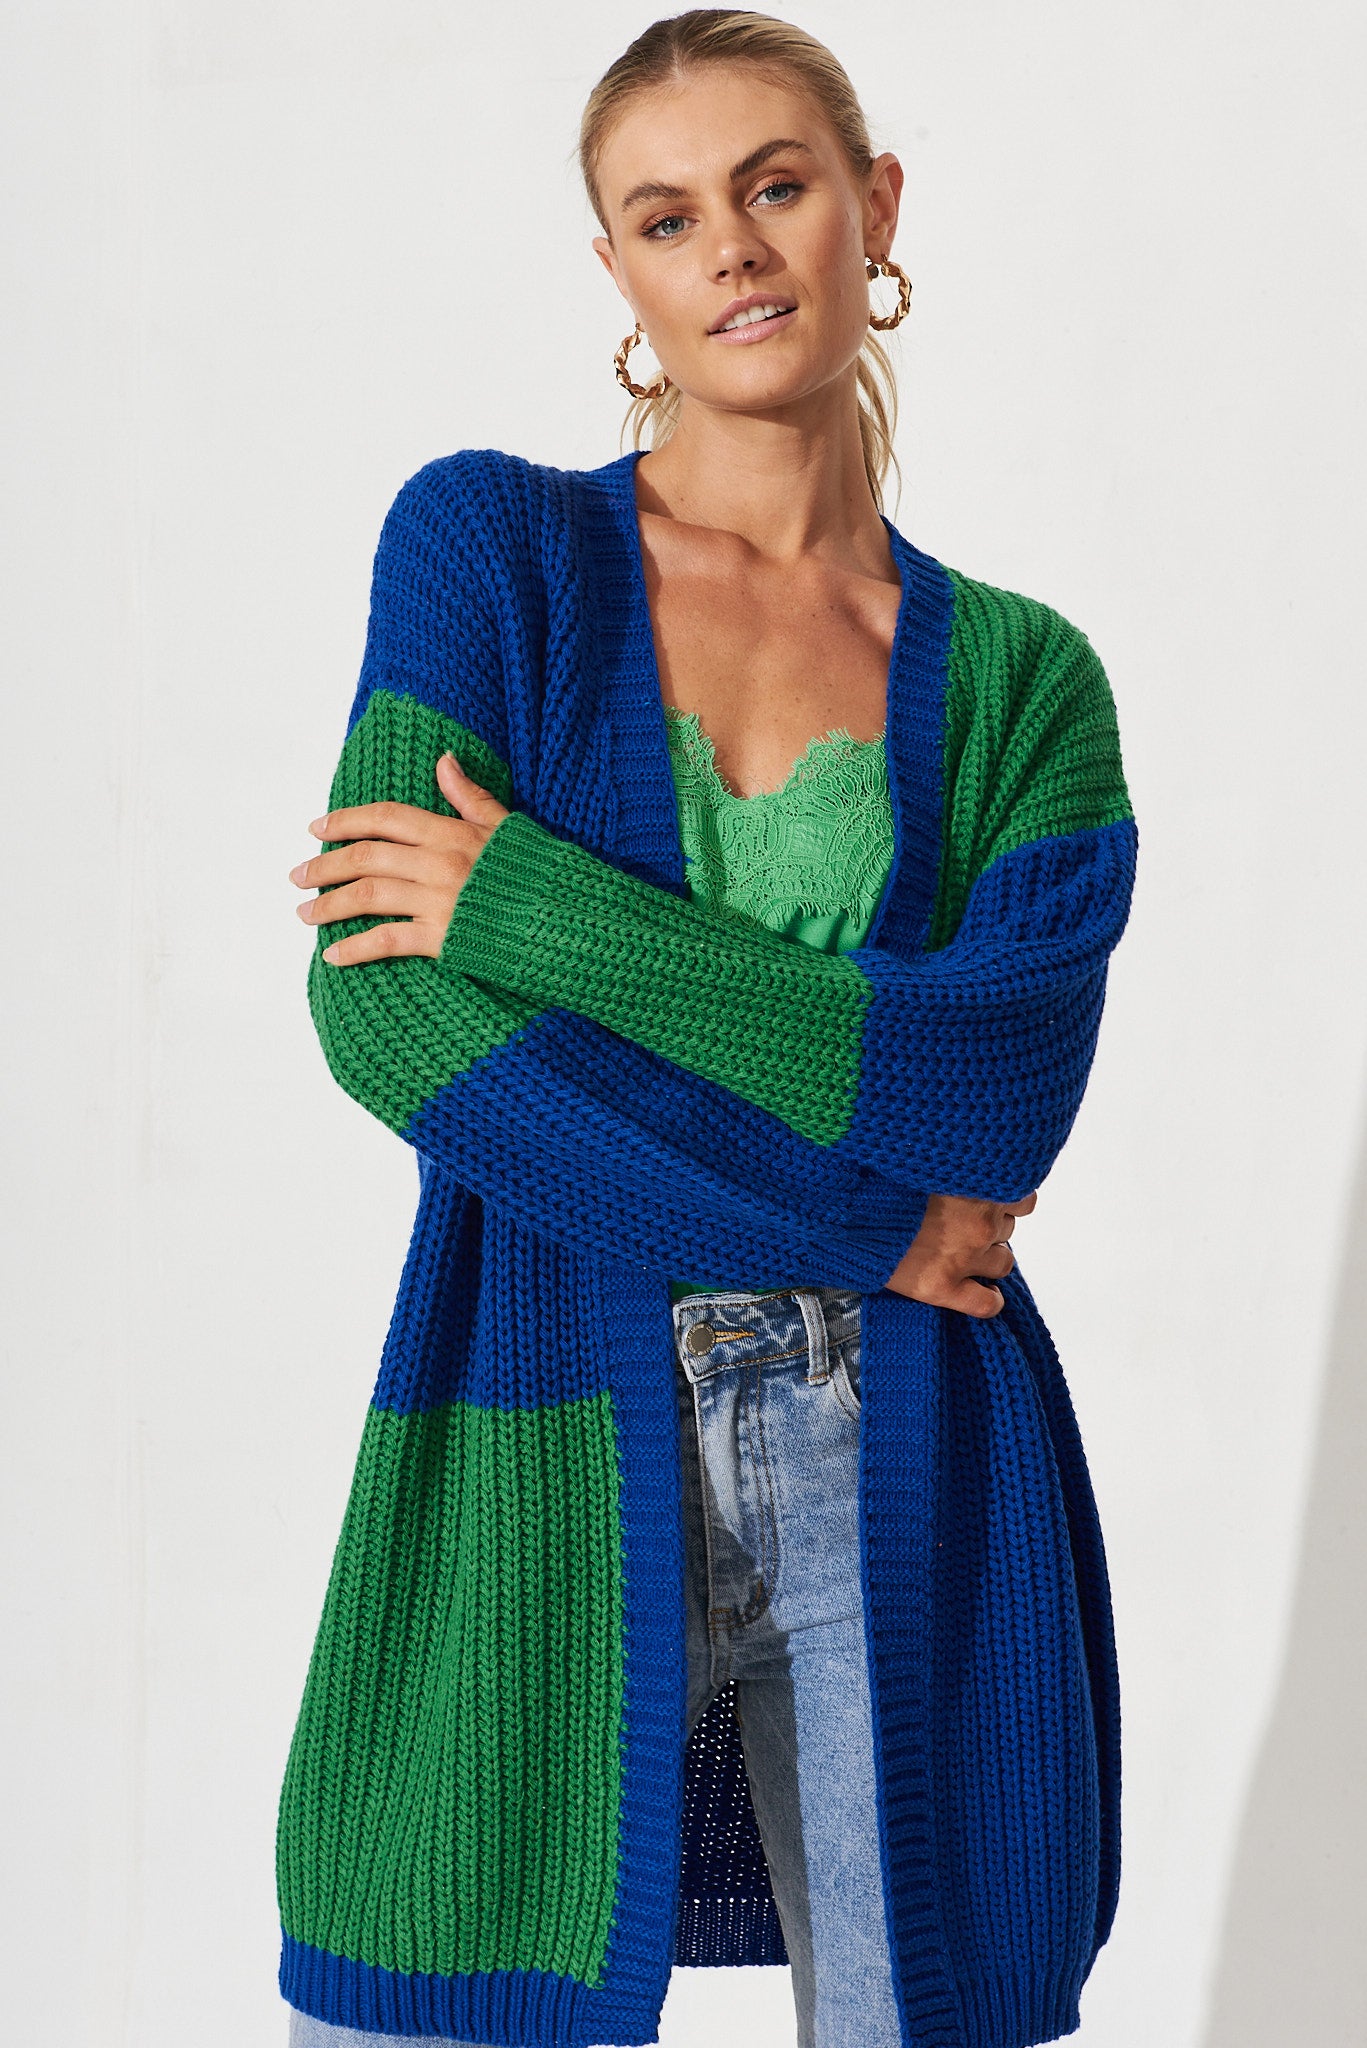 Spezia Knit Cardigan In Blue And Green Colourblock Cotton Blend - front